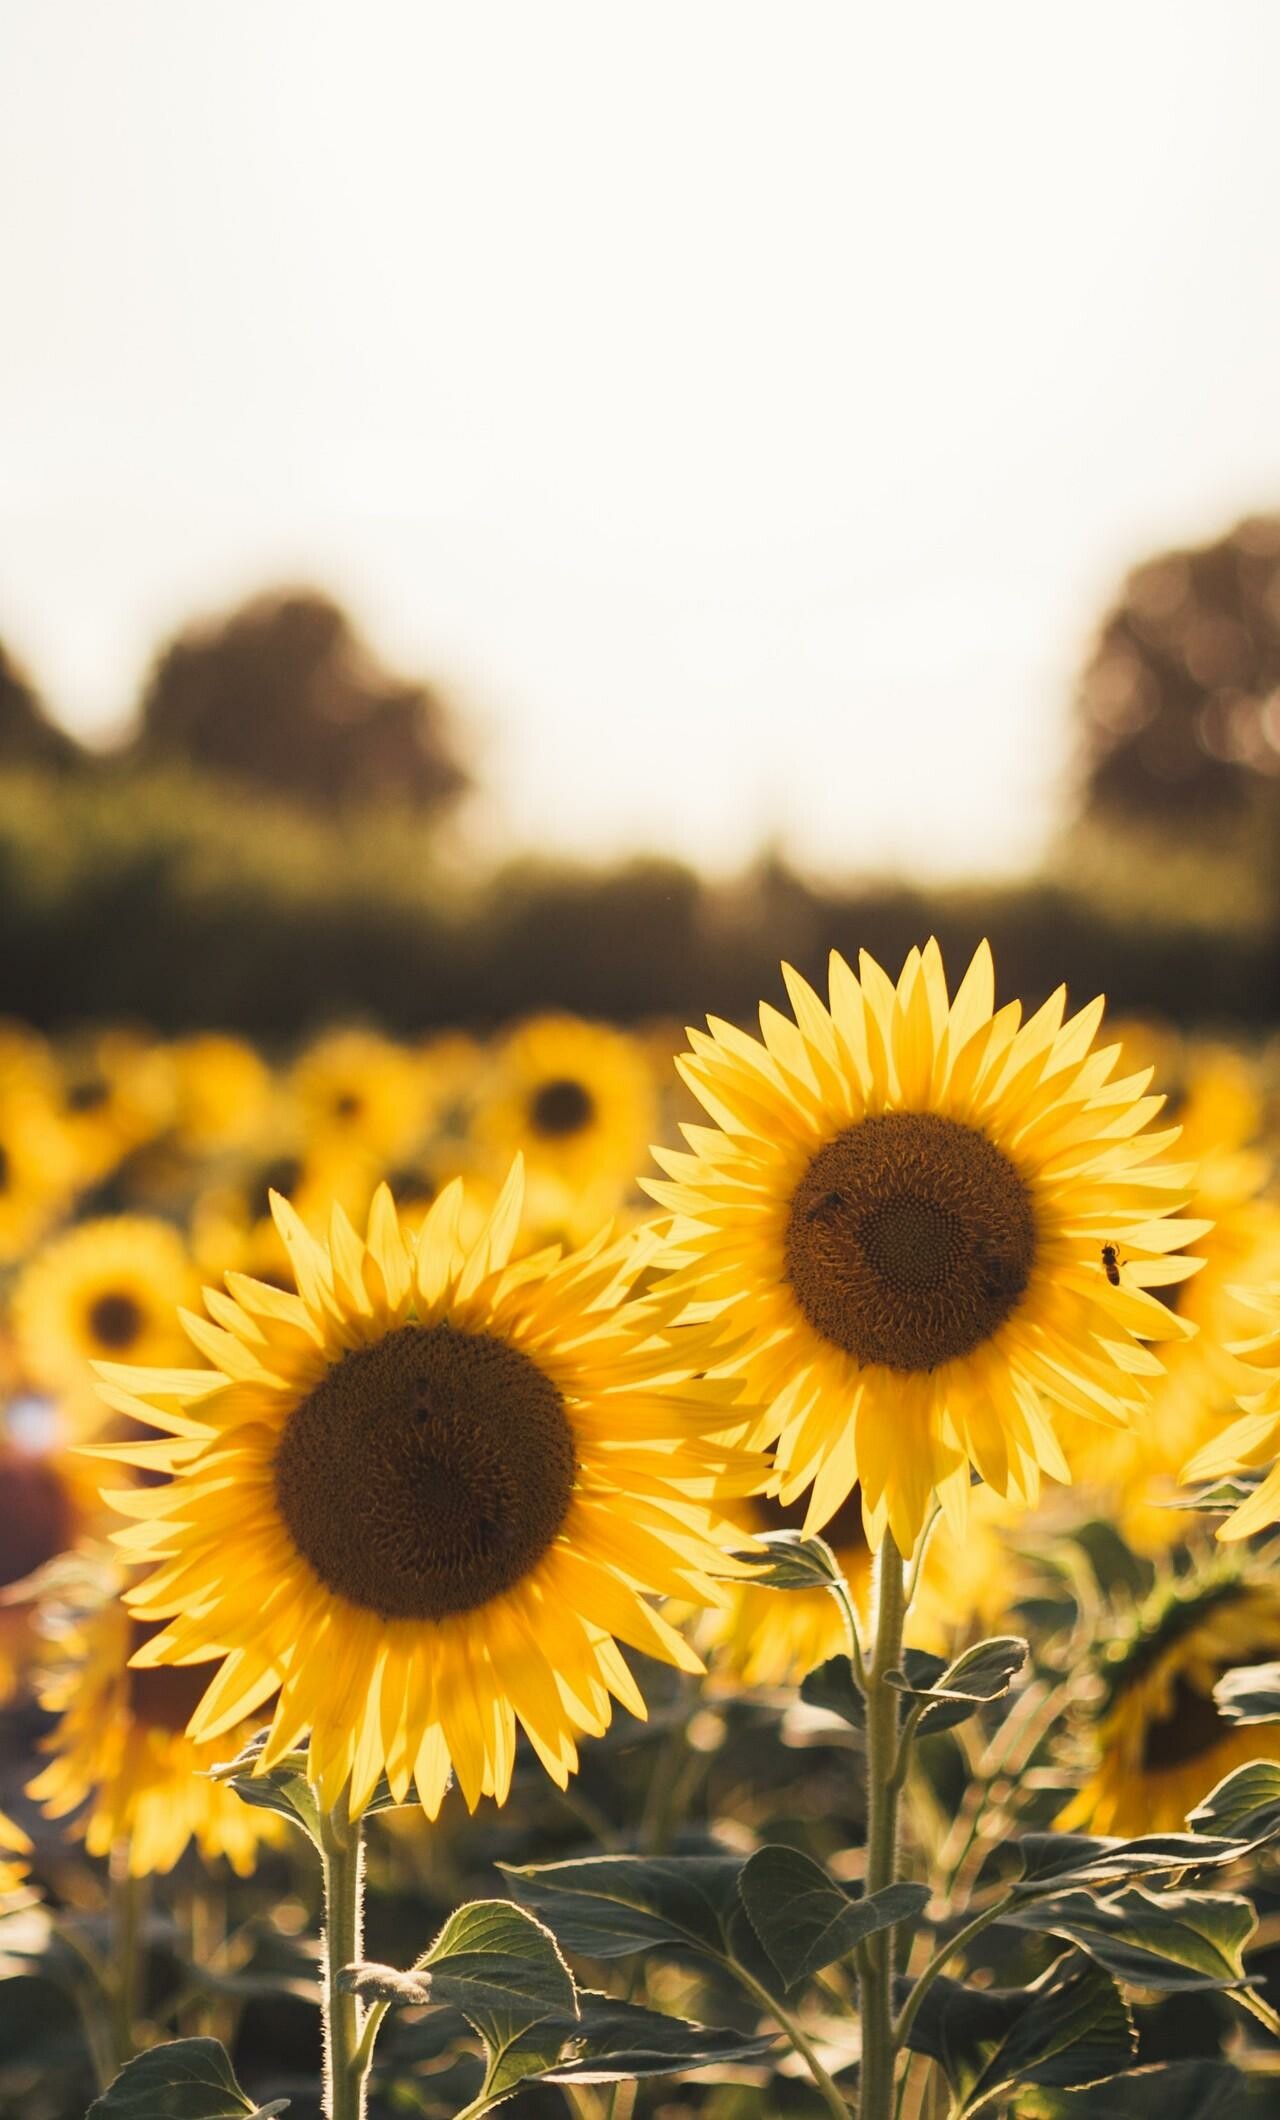 Sunflower: Native American people grew sunflowers as a crop from Mexico to Southern Canada. 1280x2120 HD Wallpaper.